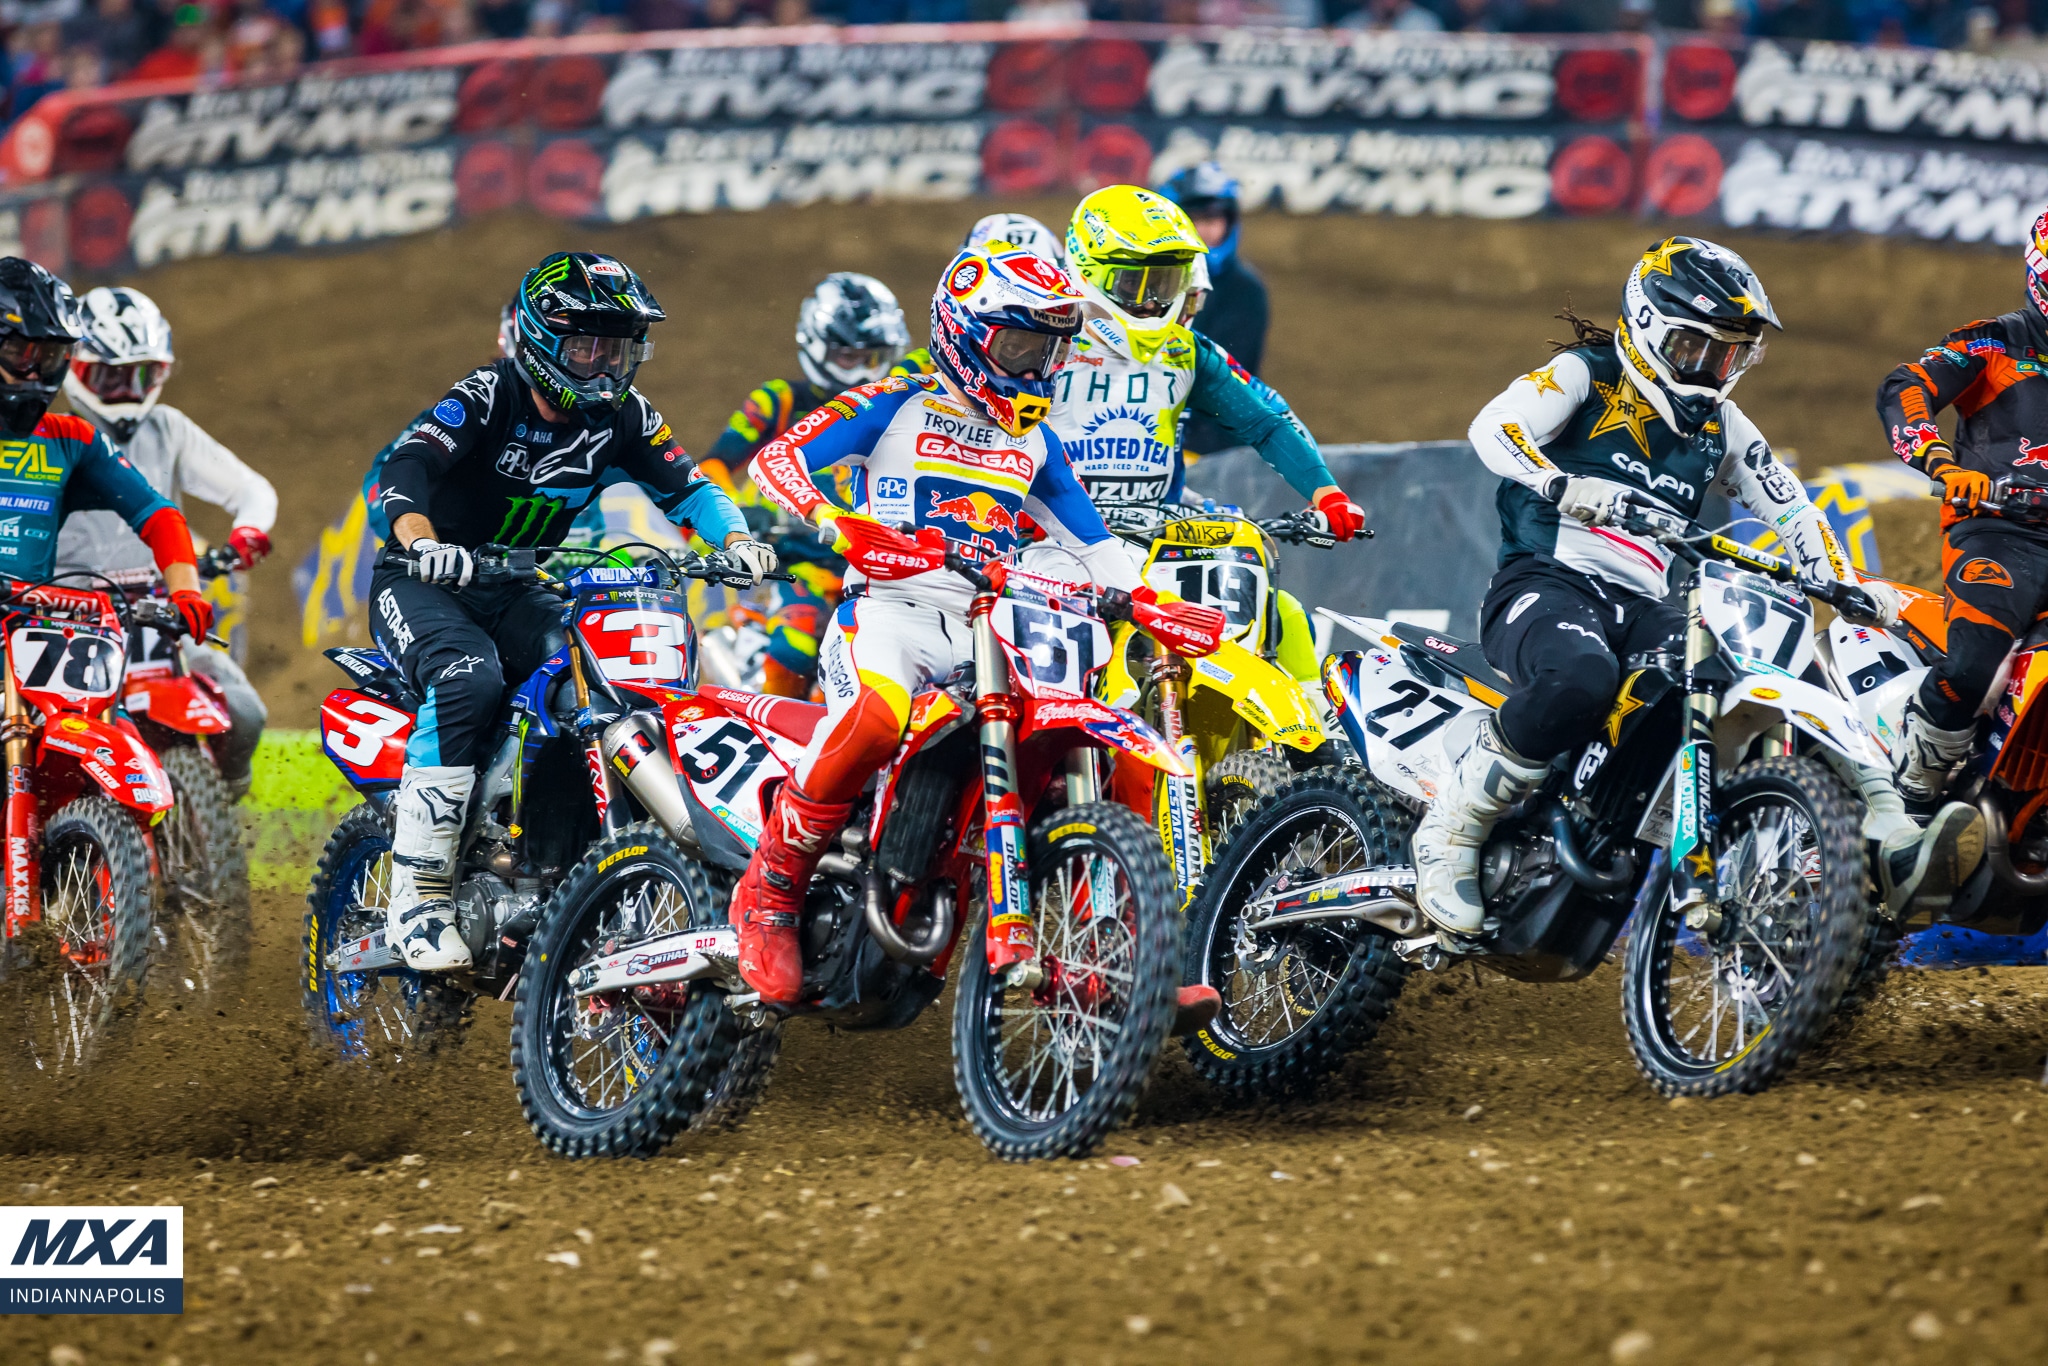 2022 INDIANAPOLIS SUPERCROSS // 450 MAIN EVENT RACE RESULTS Archyworldys